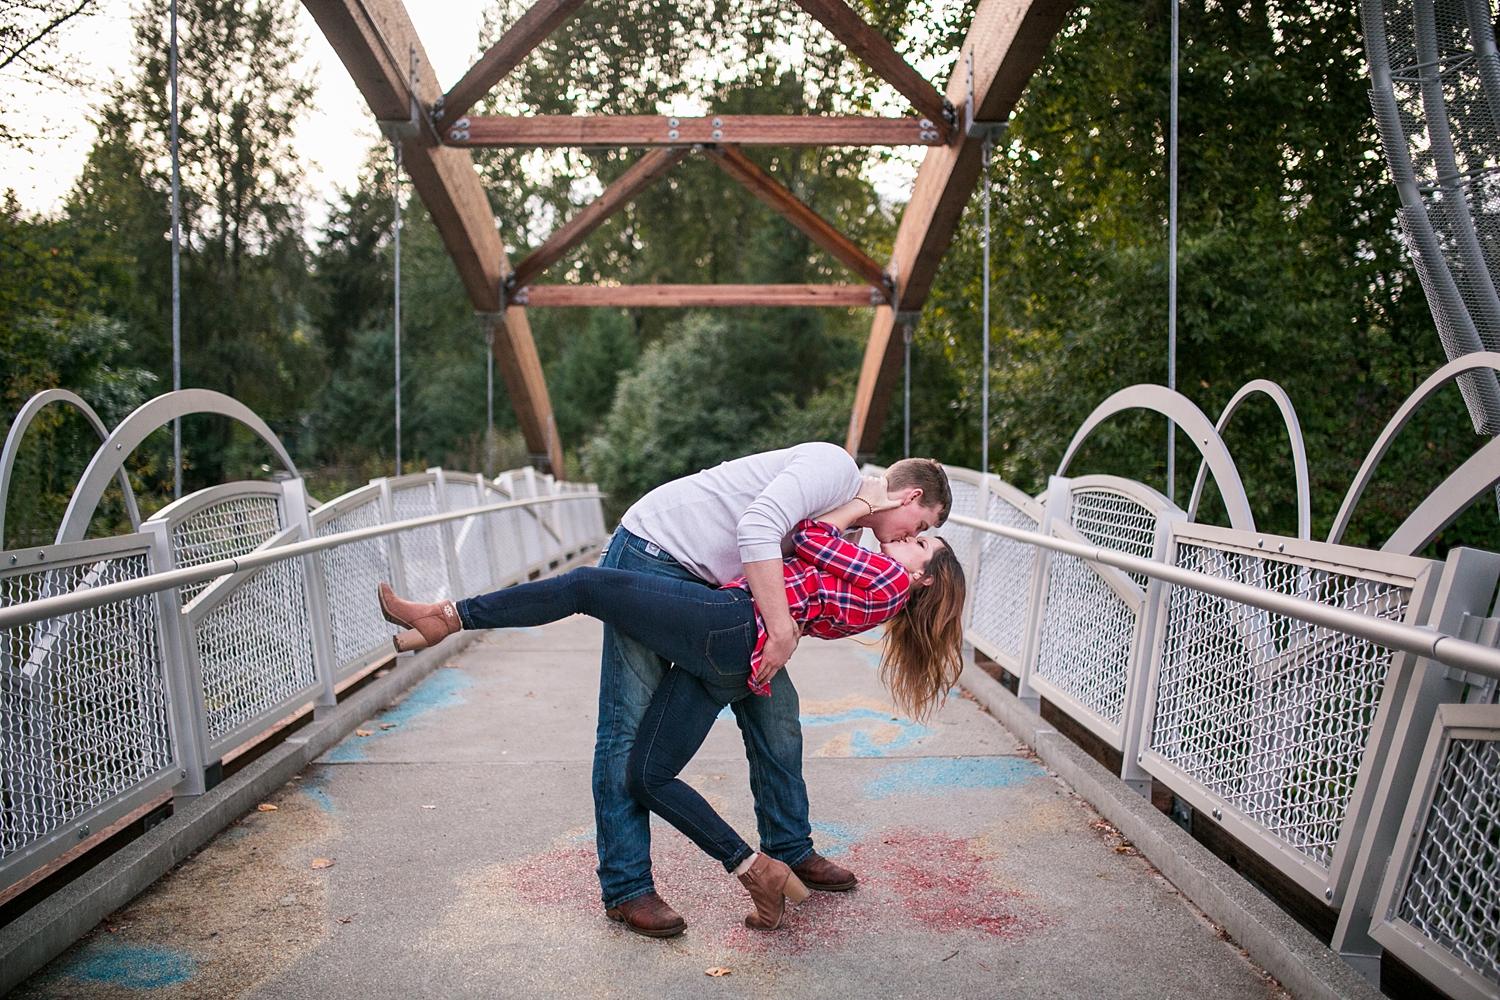 Style tips for amazing engagement pictures: have fun with it!